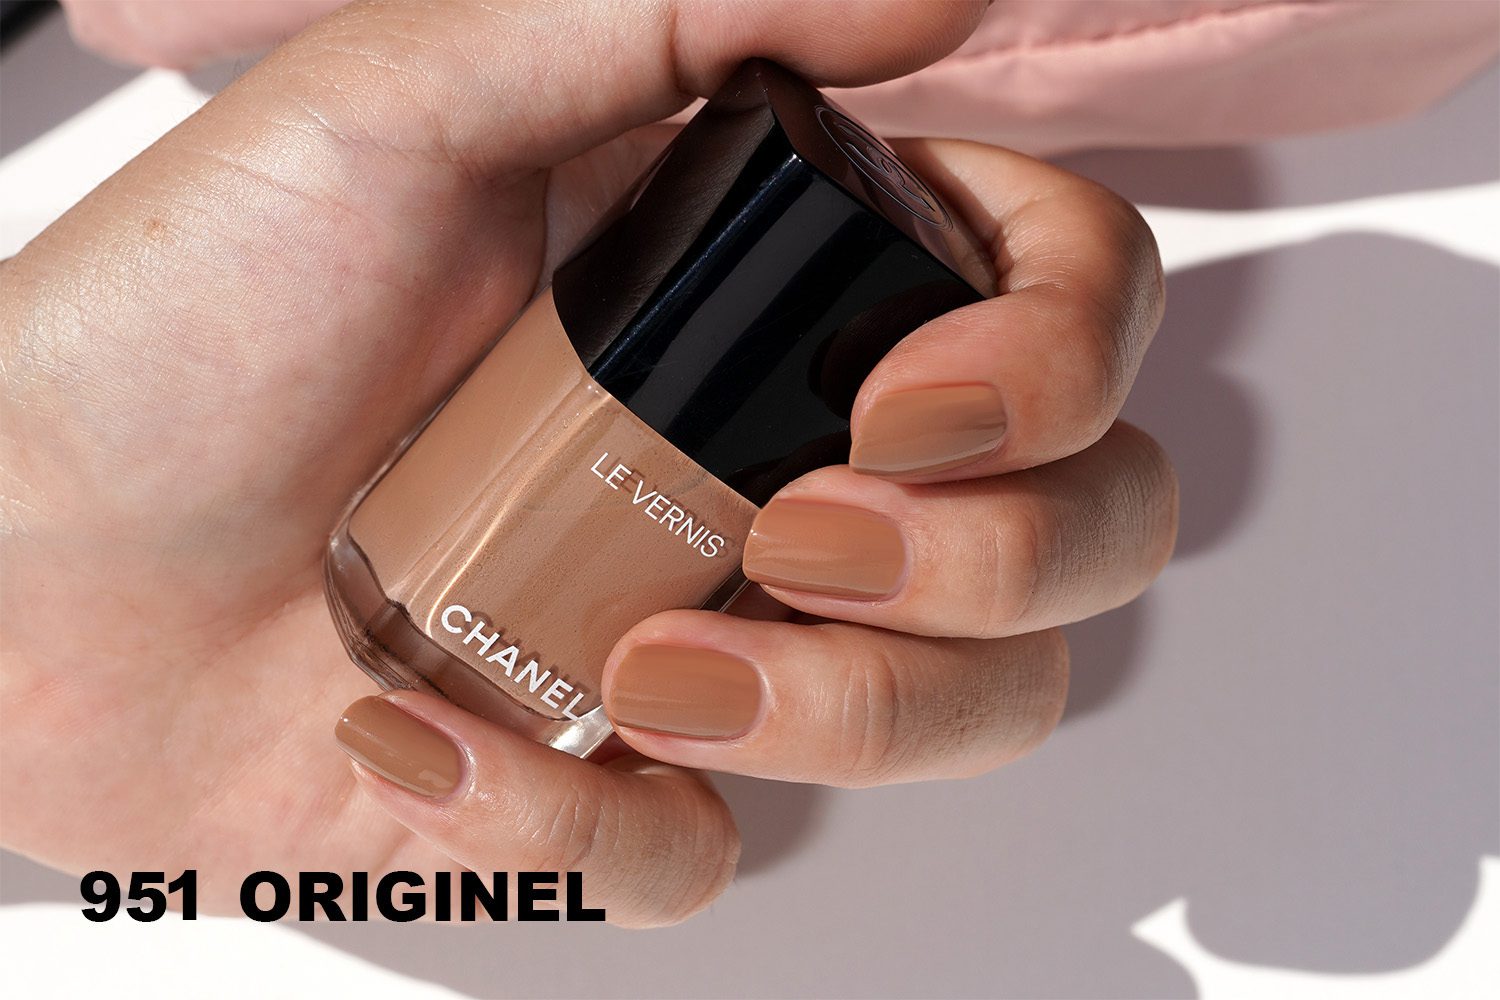 Top 10 Chanel Le Vernis Nail Shades + Lip Colors to Match - The